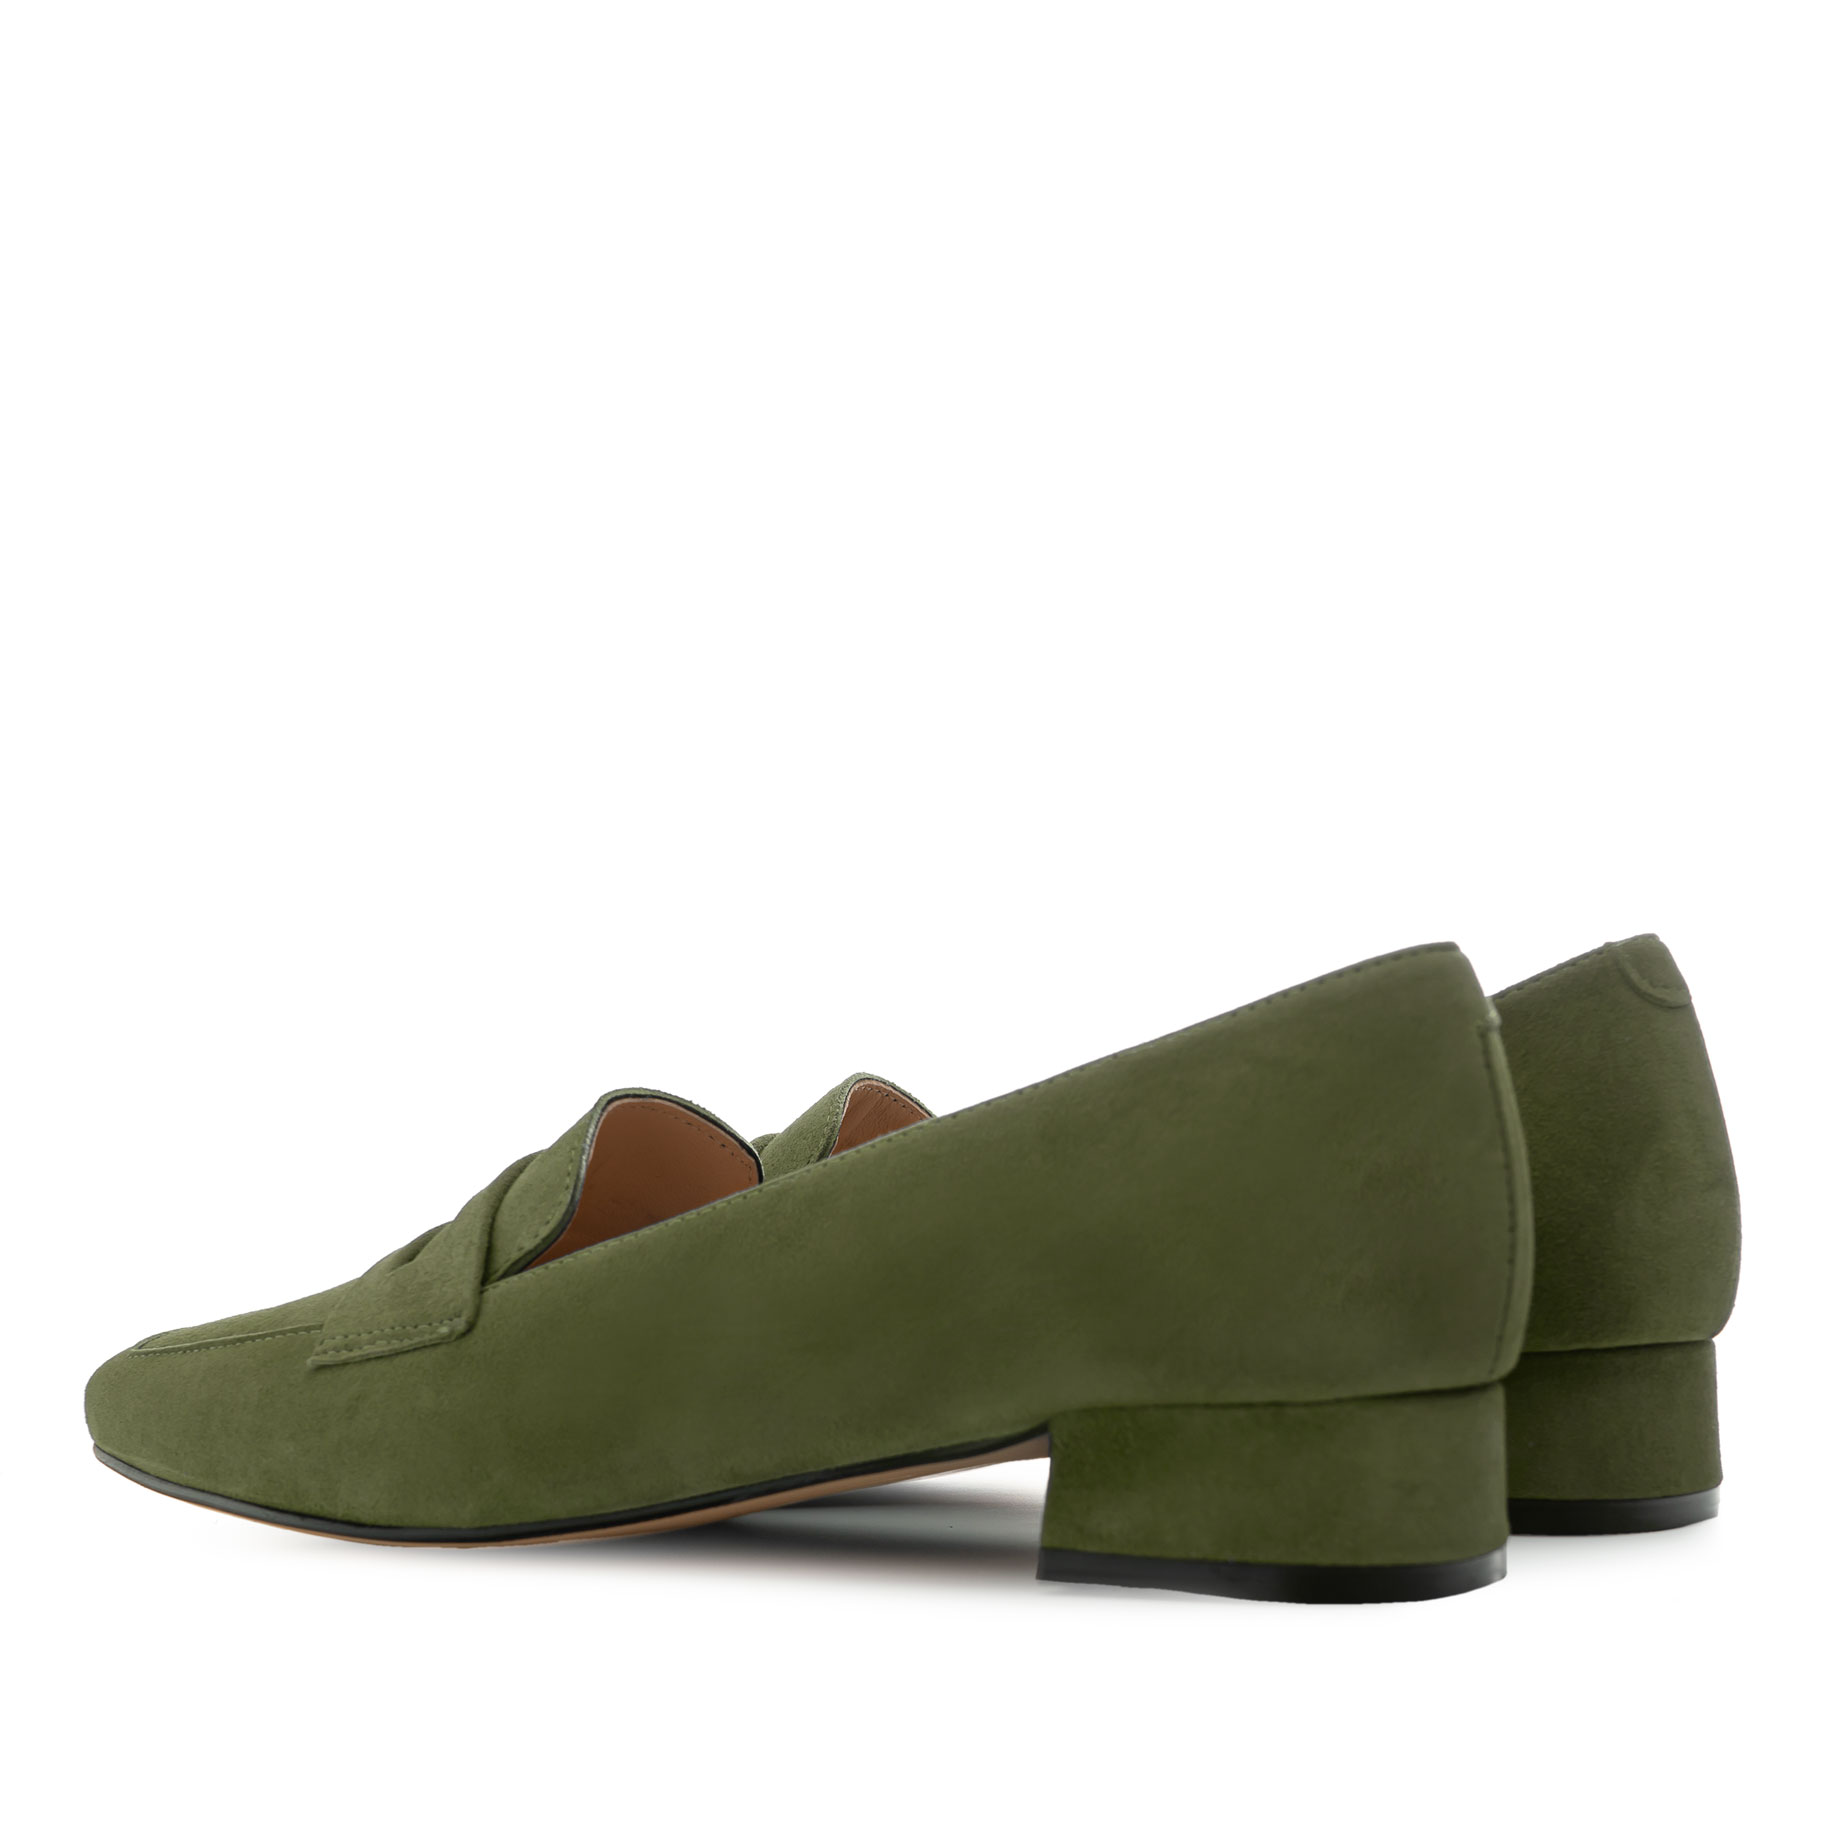 Moccasins in Olive Green Suede Leather 